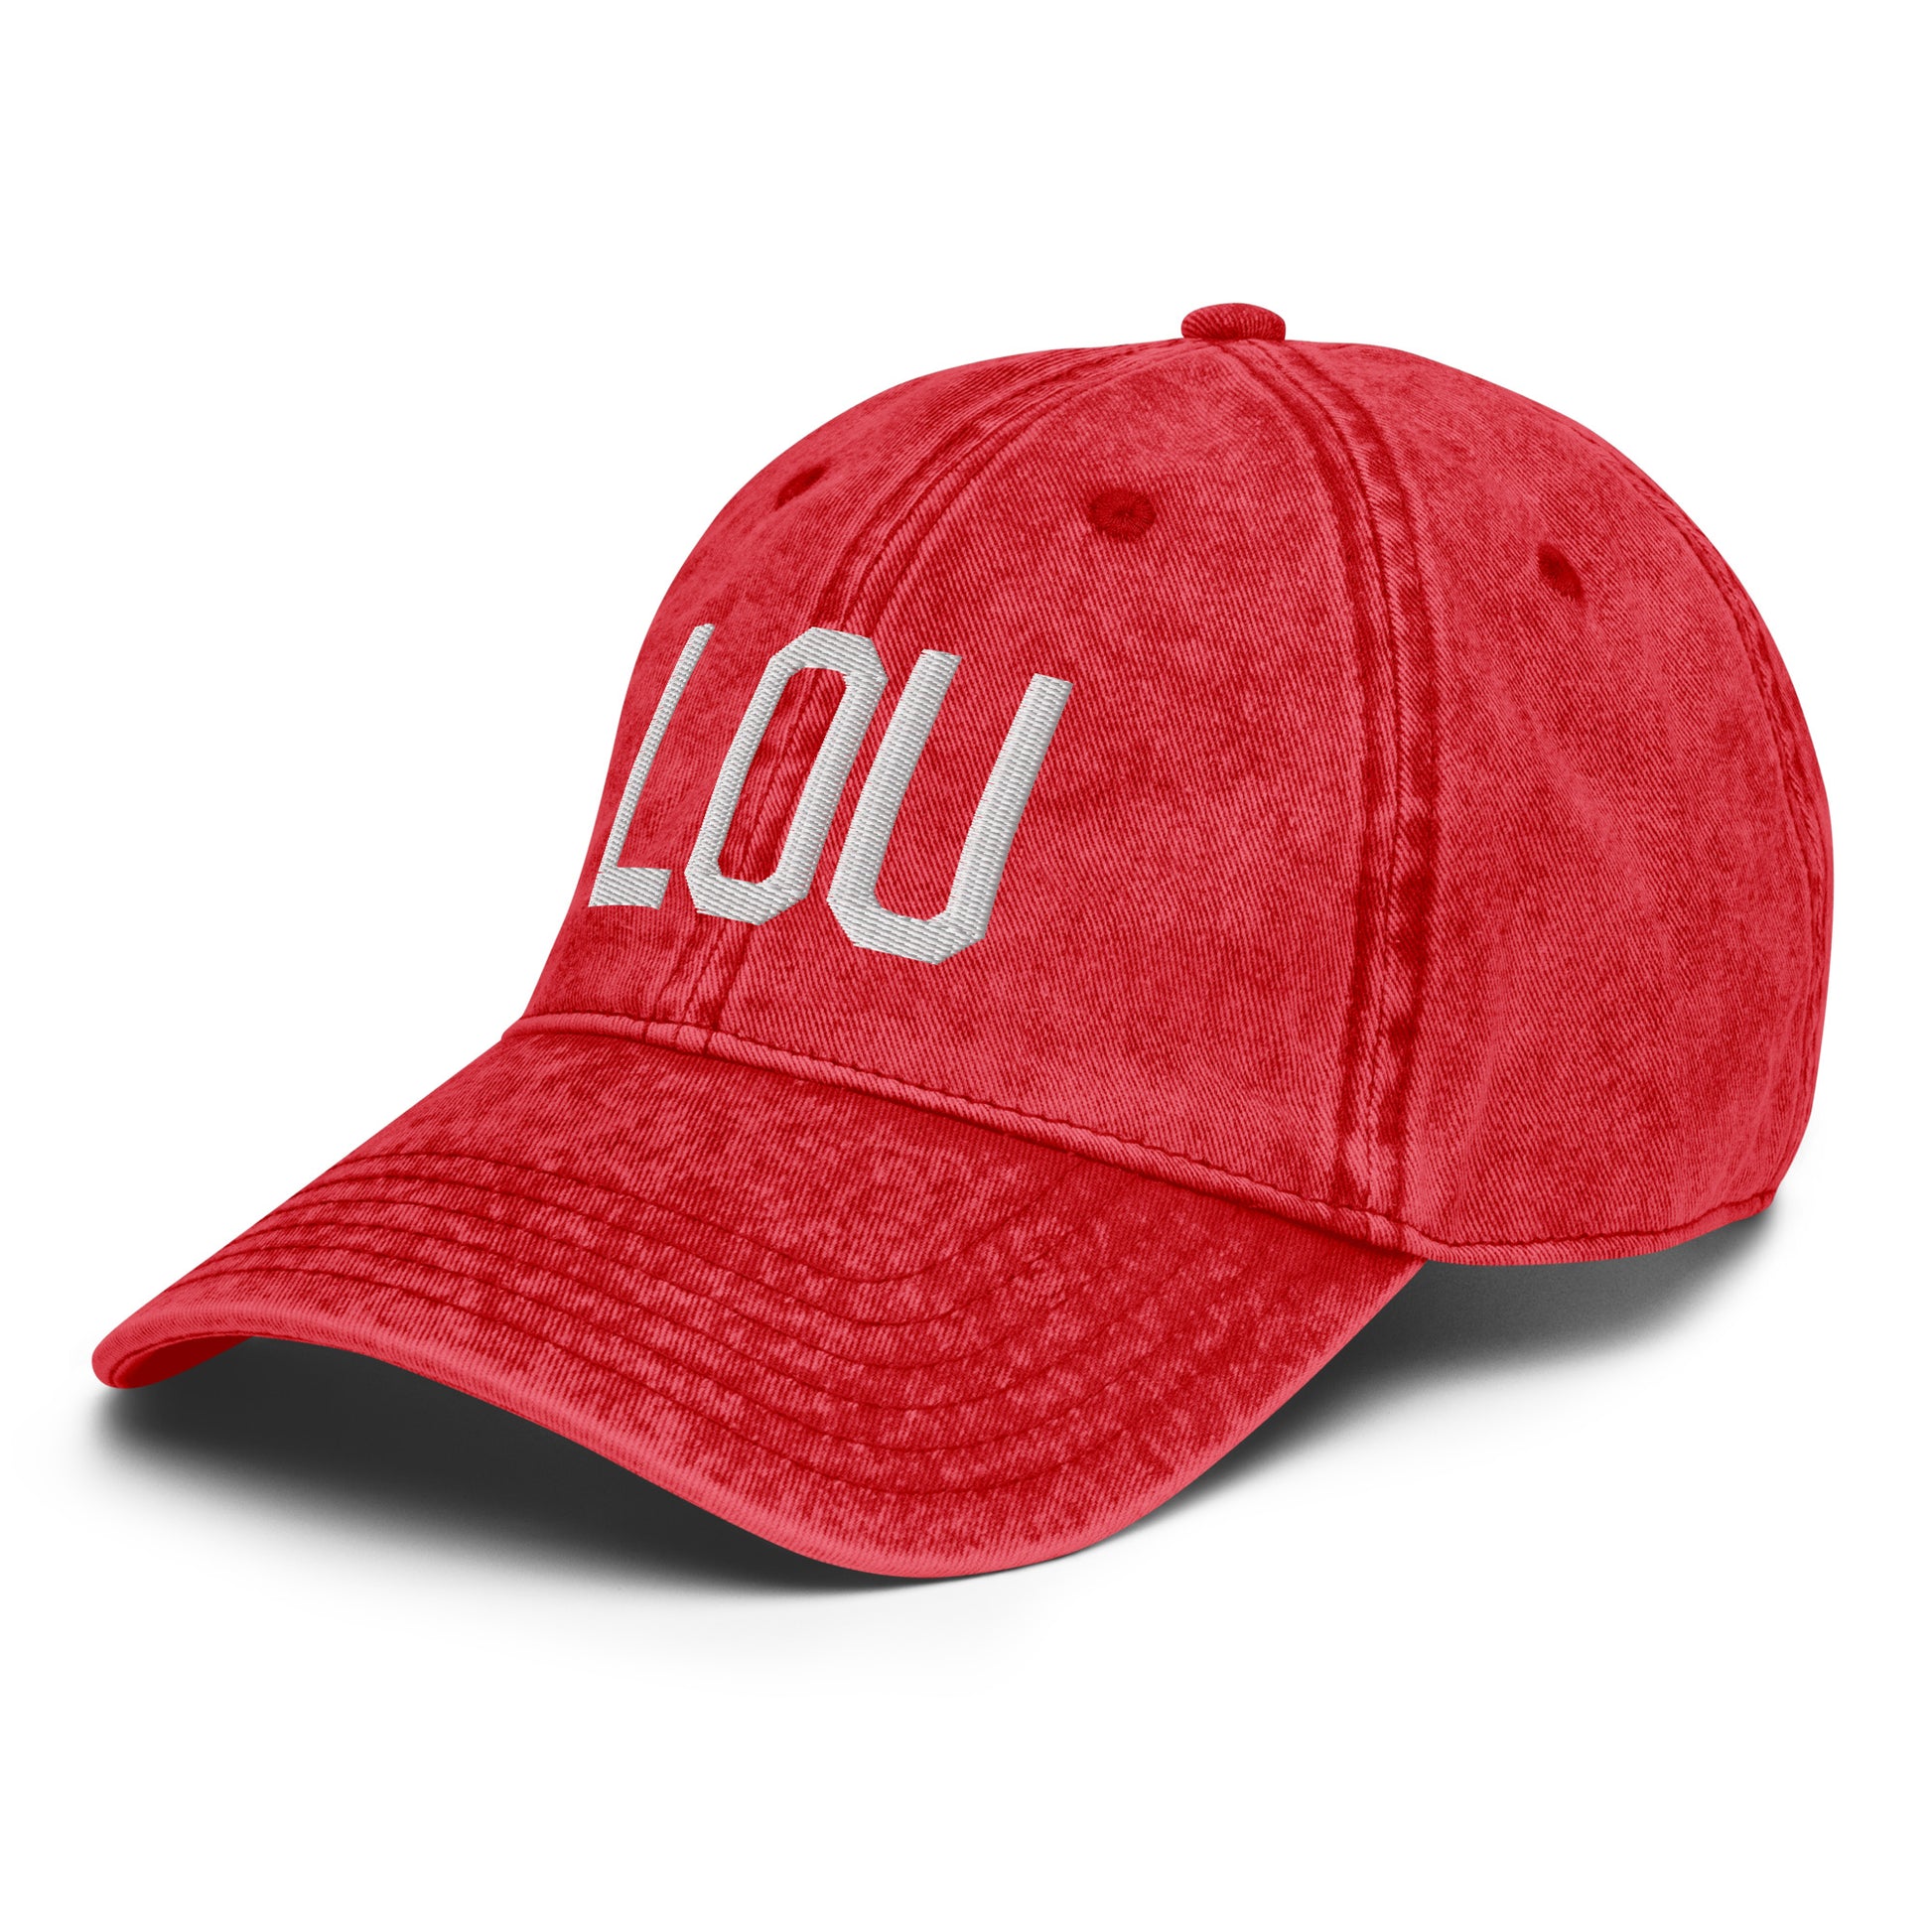 Airport Code Twill Cap - White • LOU Louisville • YHM Designs - Image 23